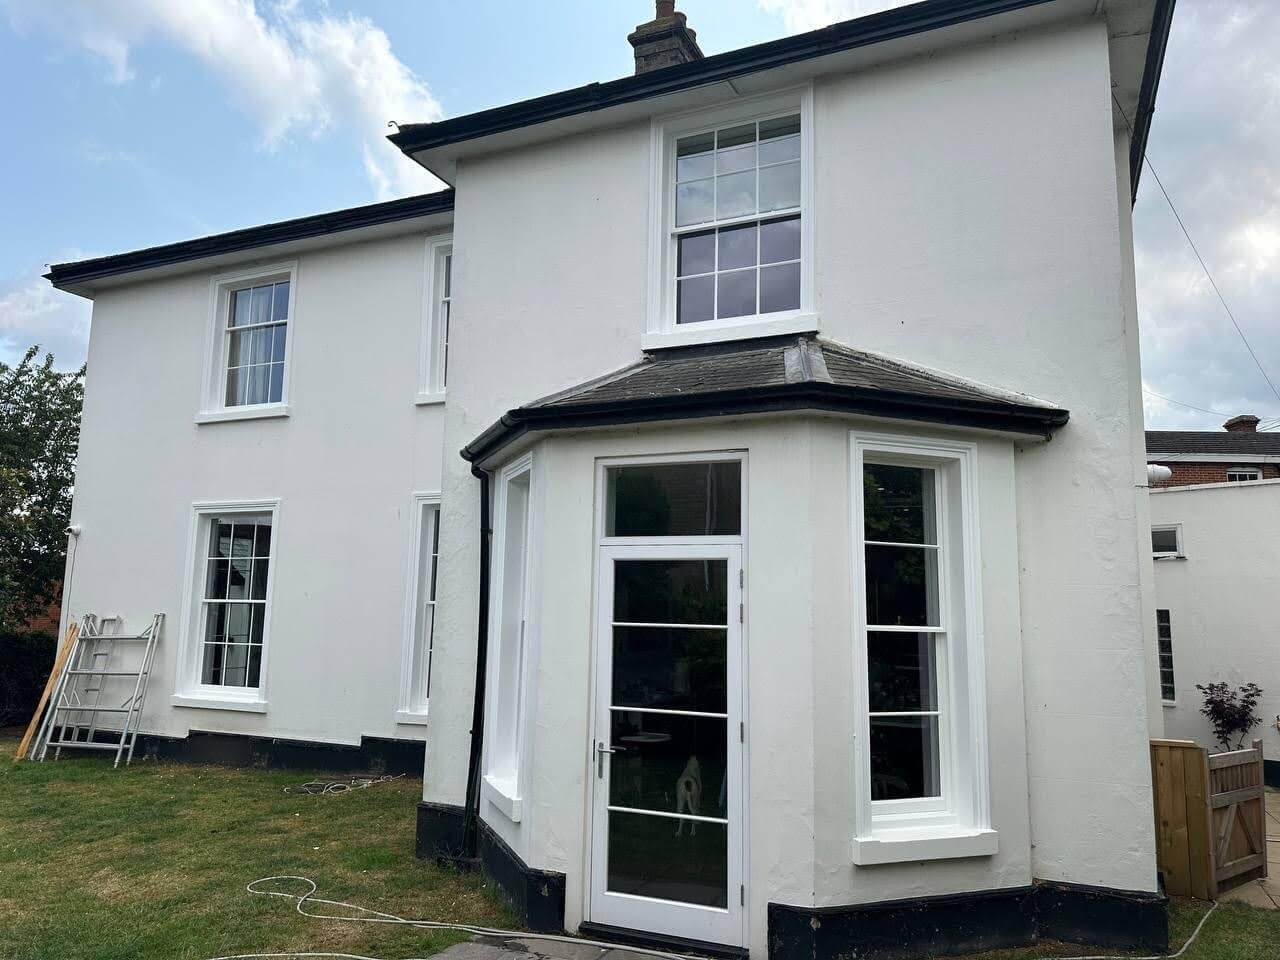 Windows restoration and reglazing project in Colchester